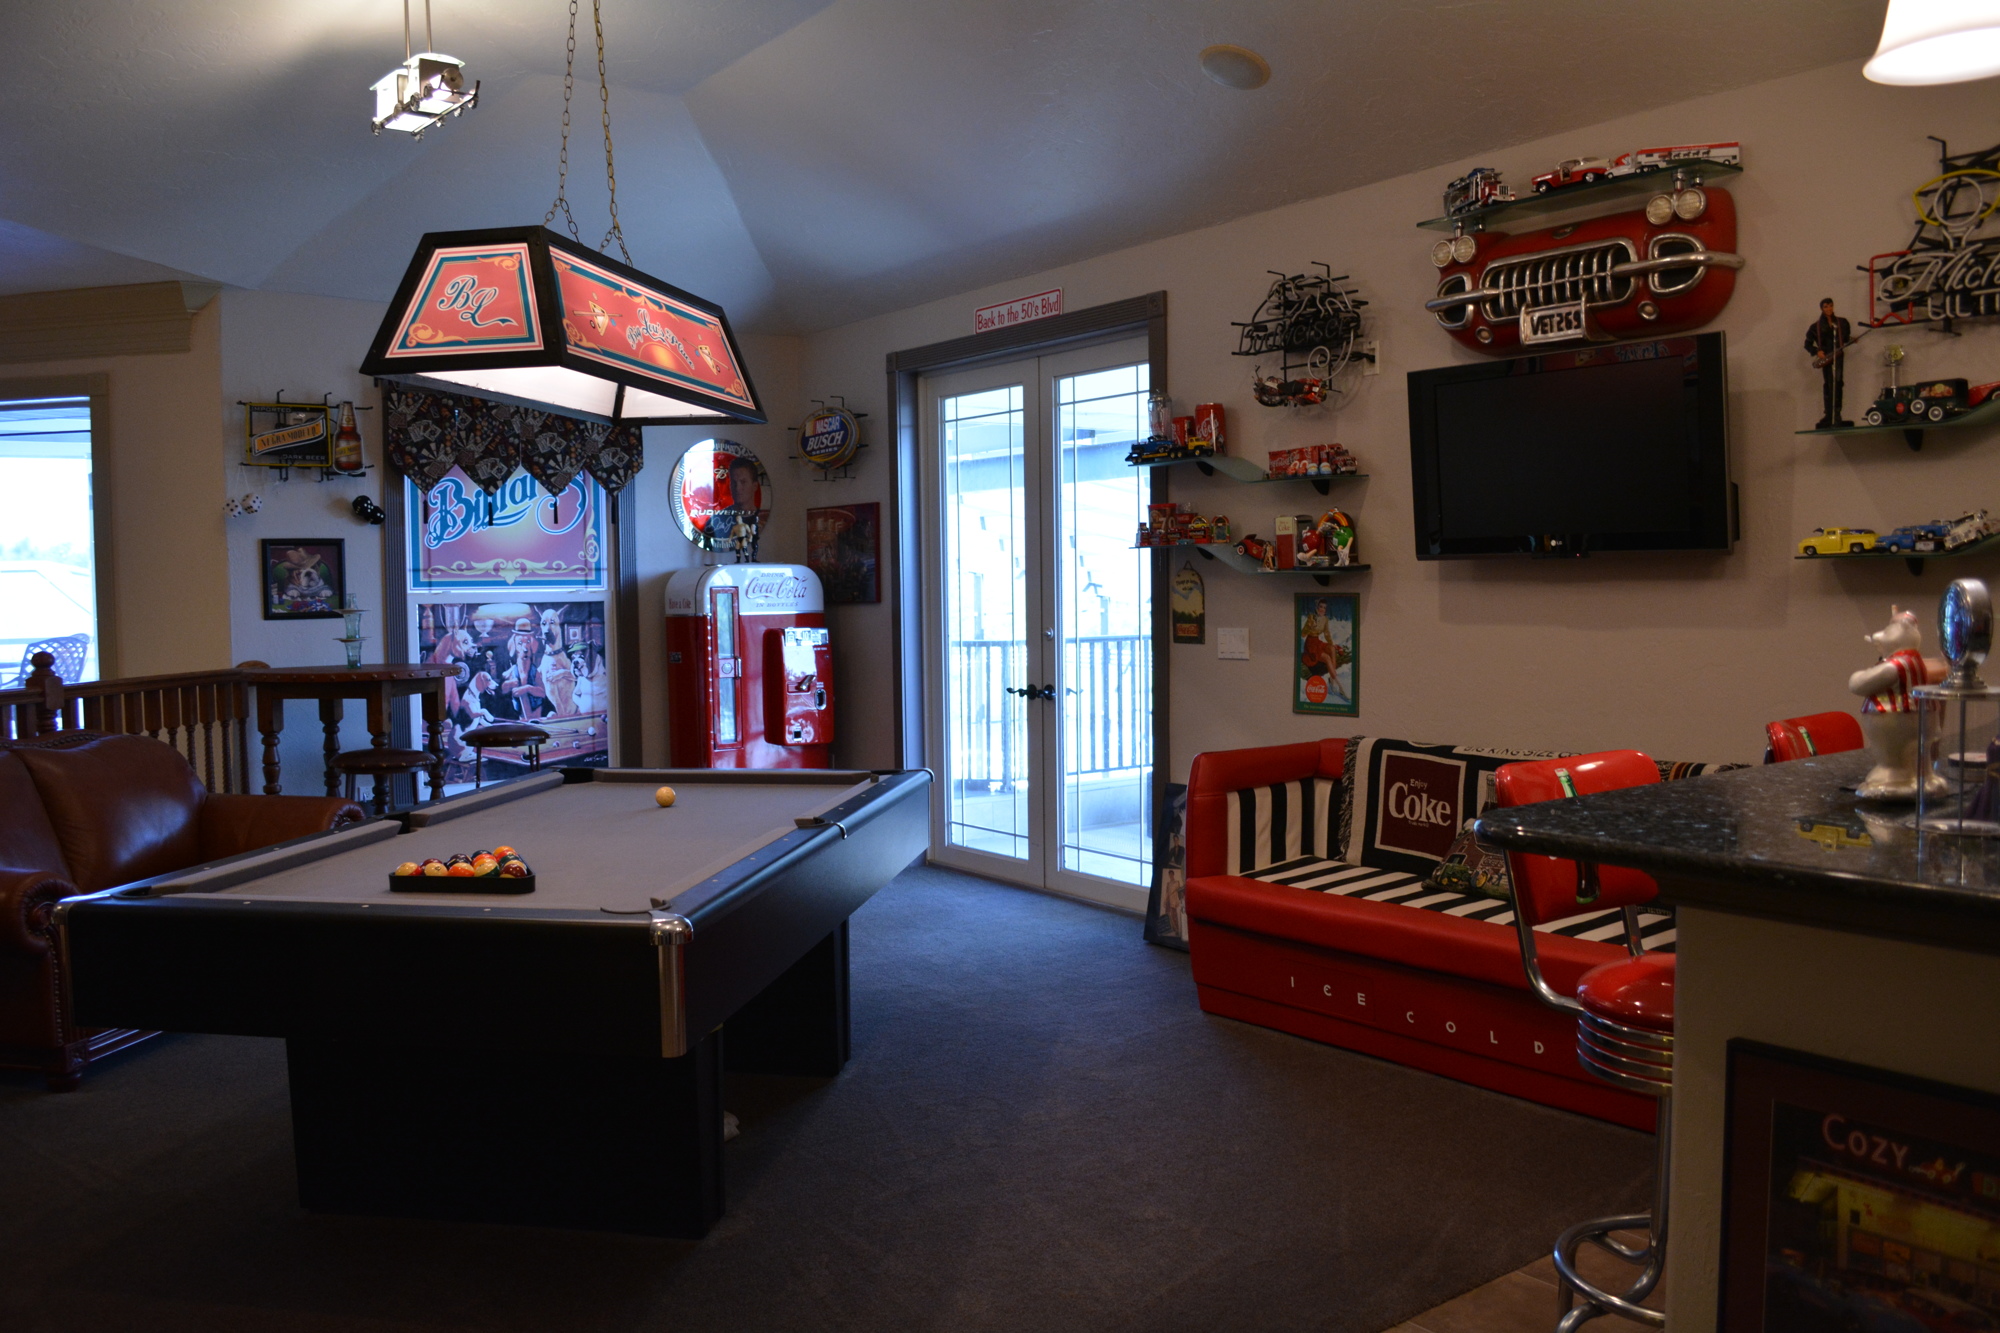 Upstairs in the main home, the owners have created a 1950s themed space to play pool, relax or drink. It sits adjacent to a home theater space.